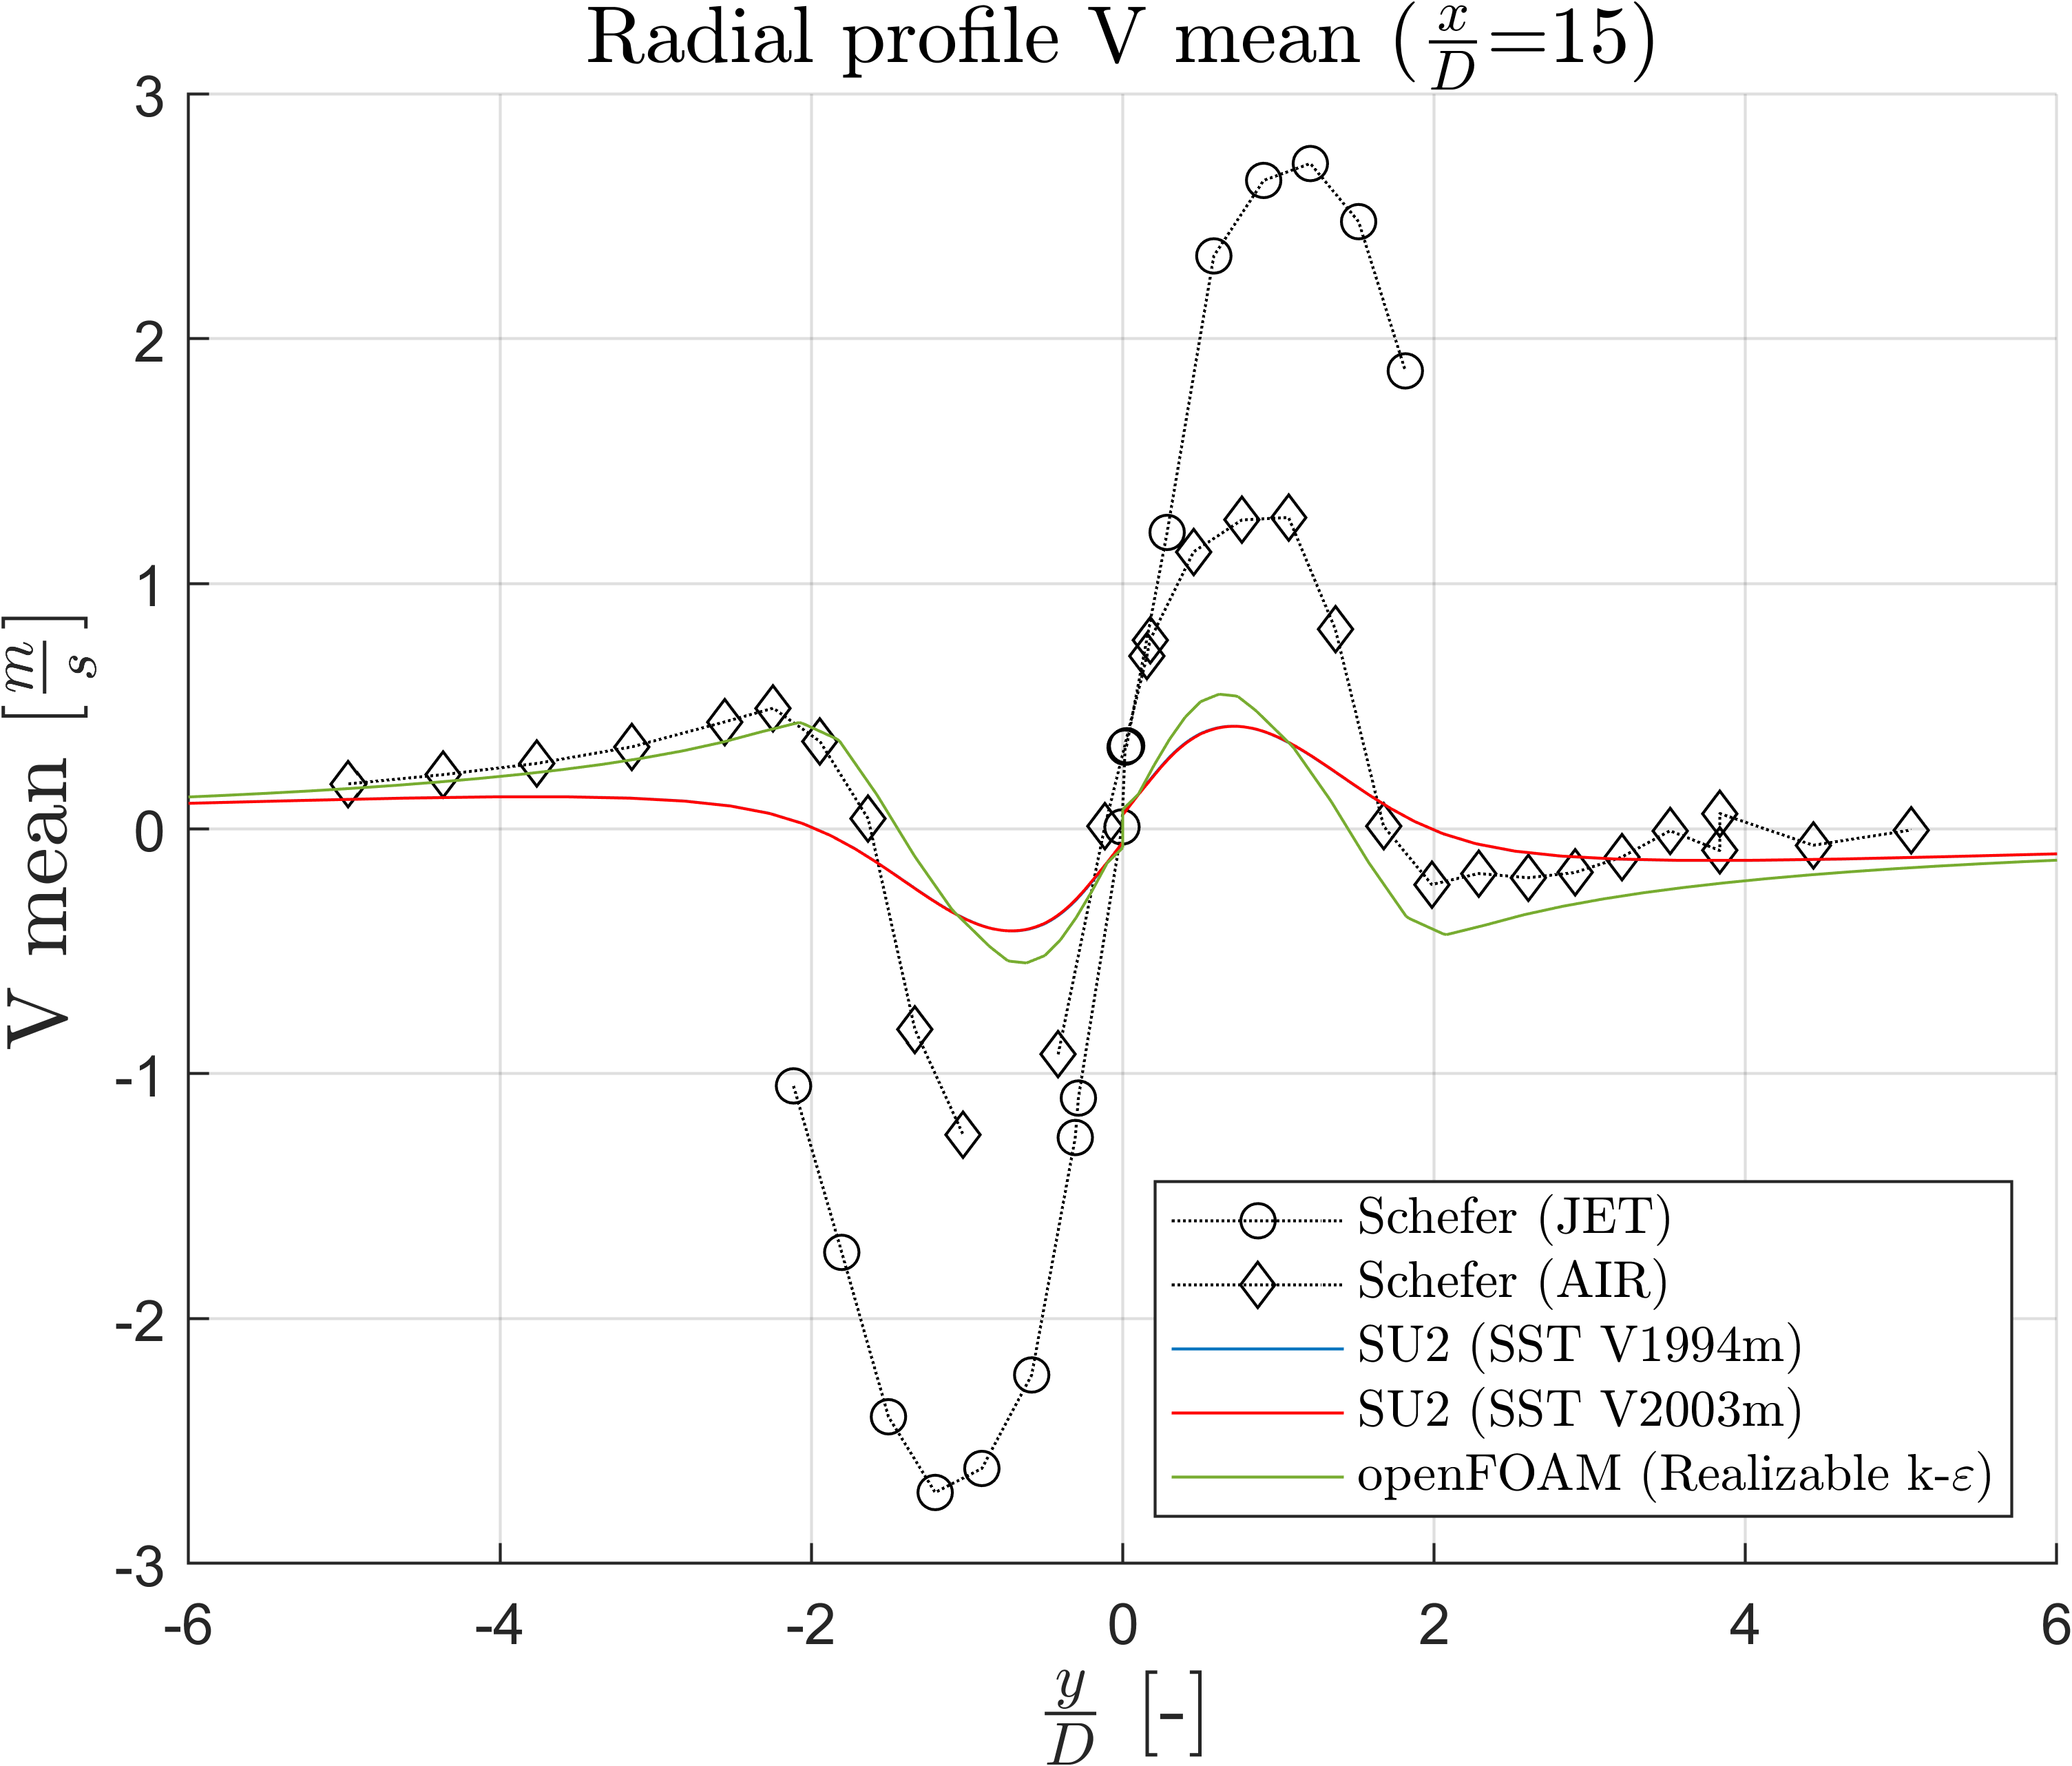 Mean Radial Velocity at x/D=15